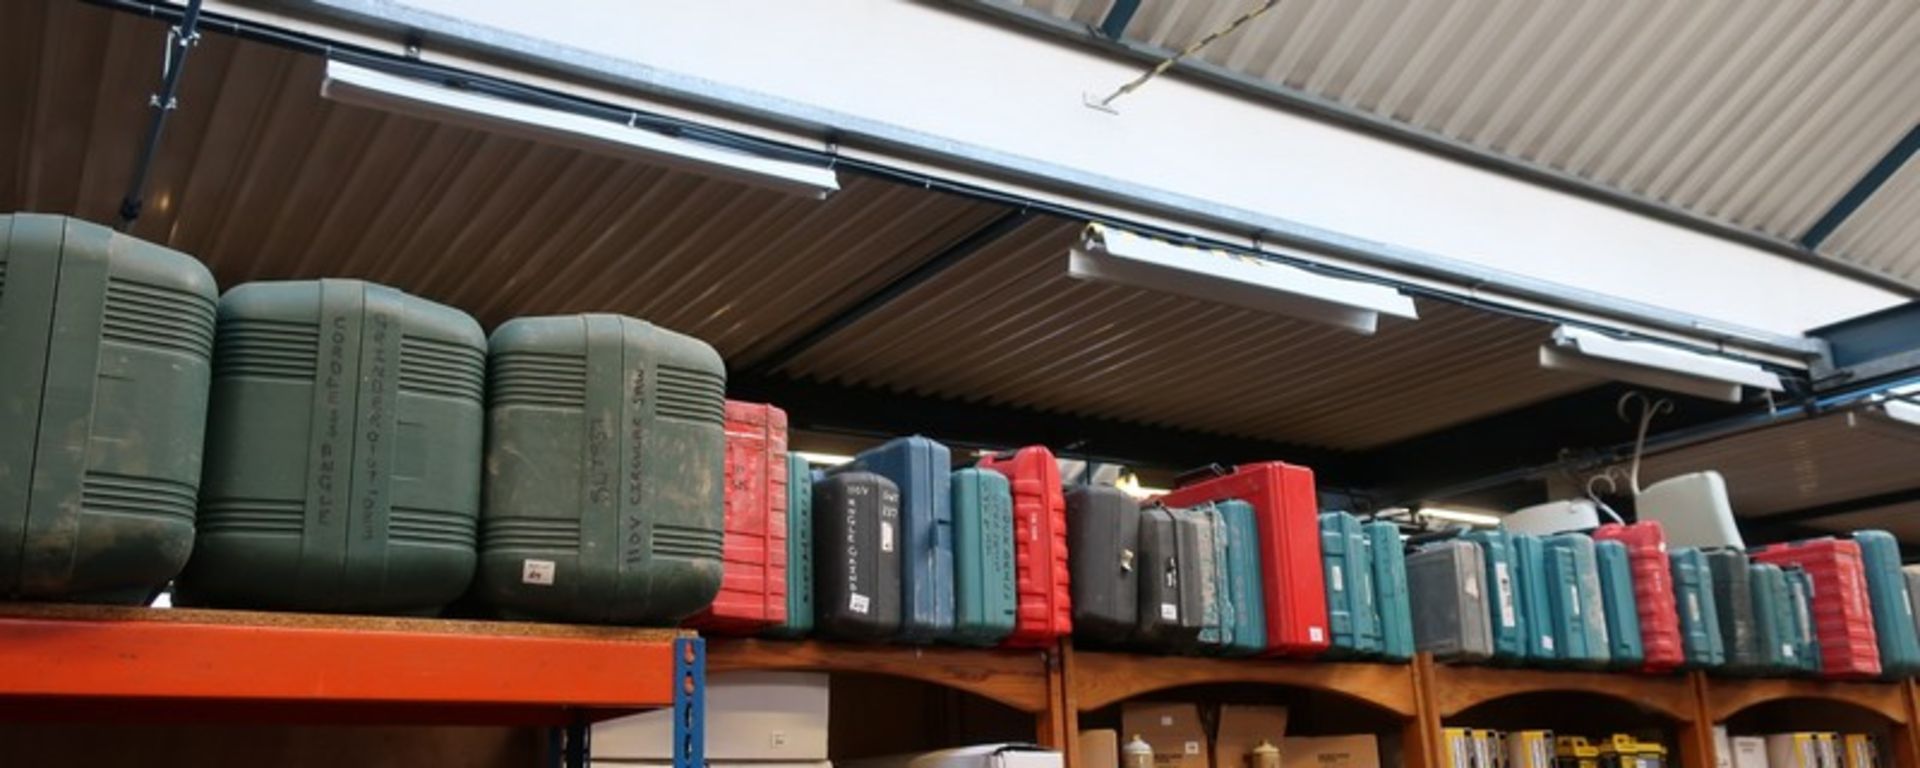 A quantity of empty Hilti and Makita tool boxes.